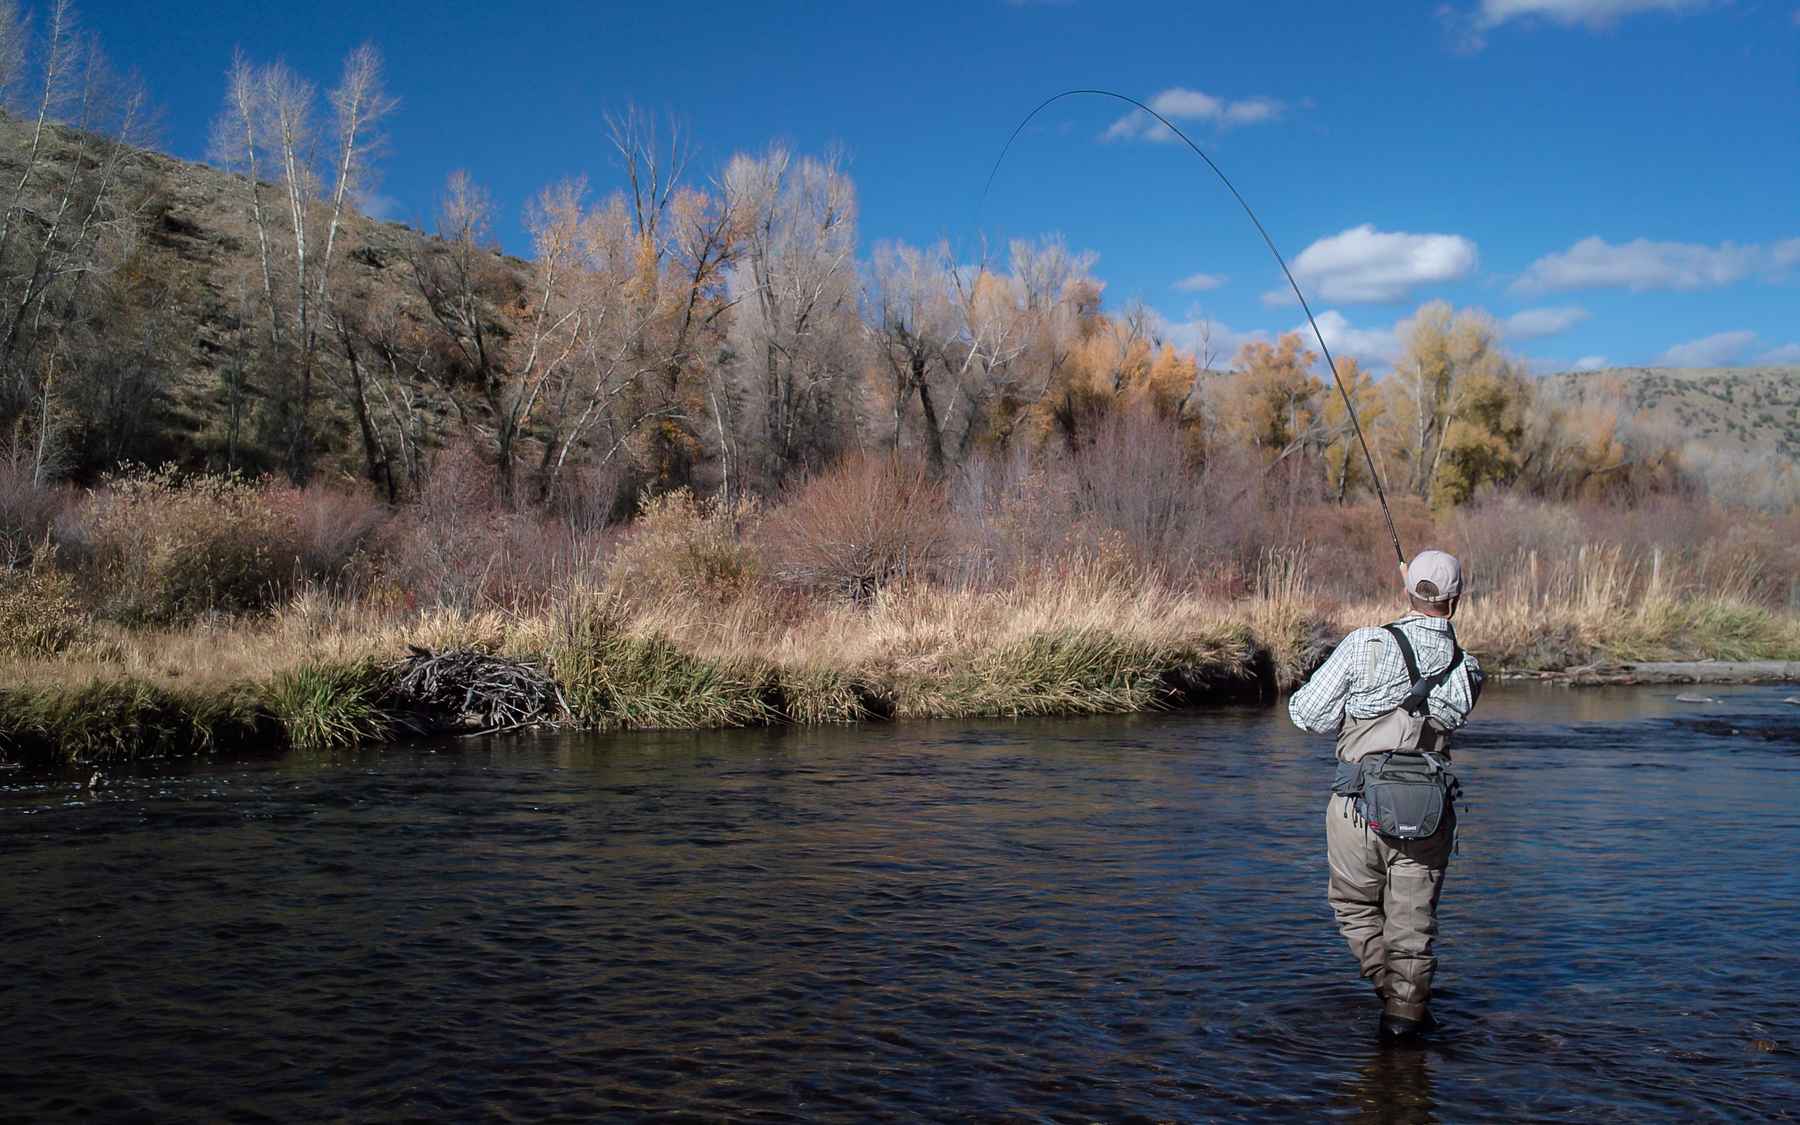 Tenkara Rods for Beginners, Fly-fish Simply!